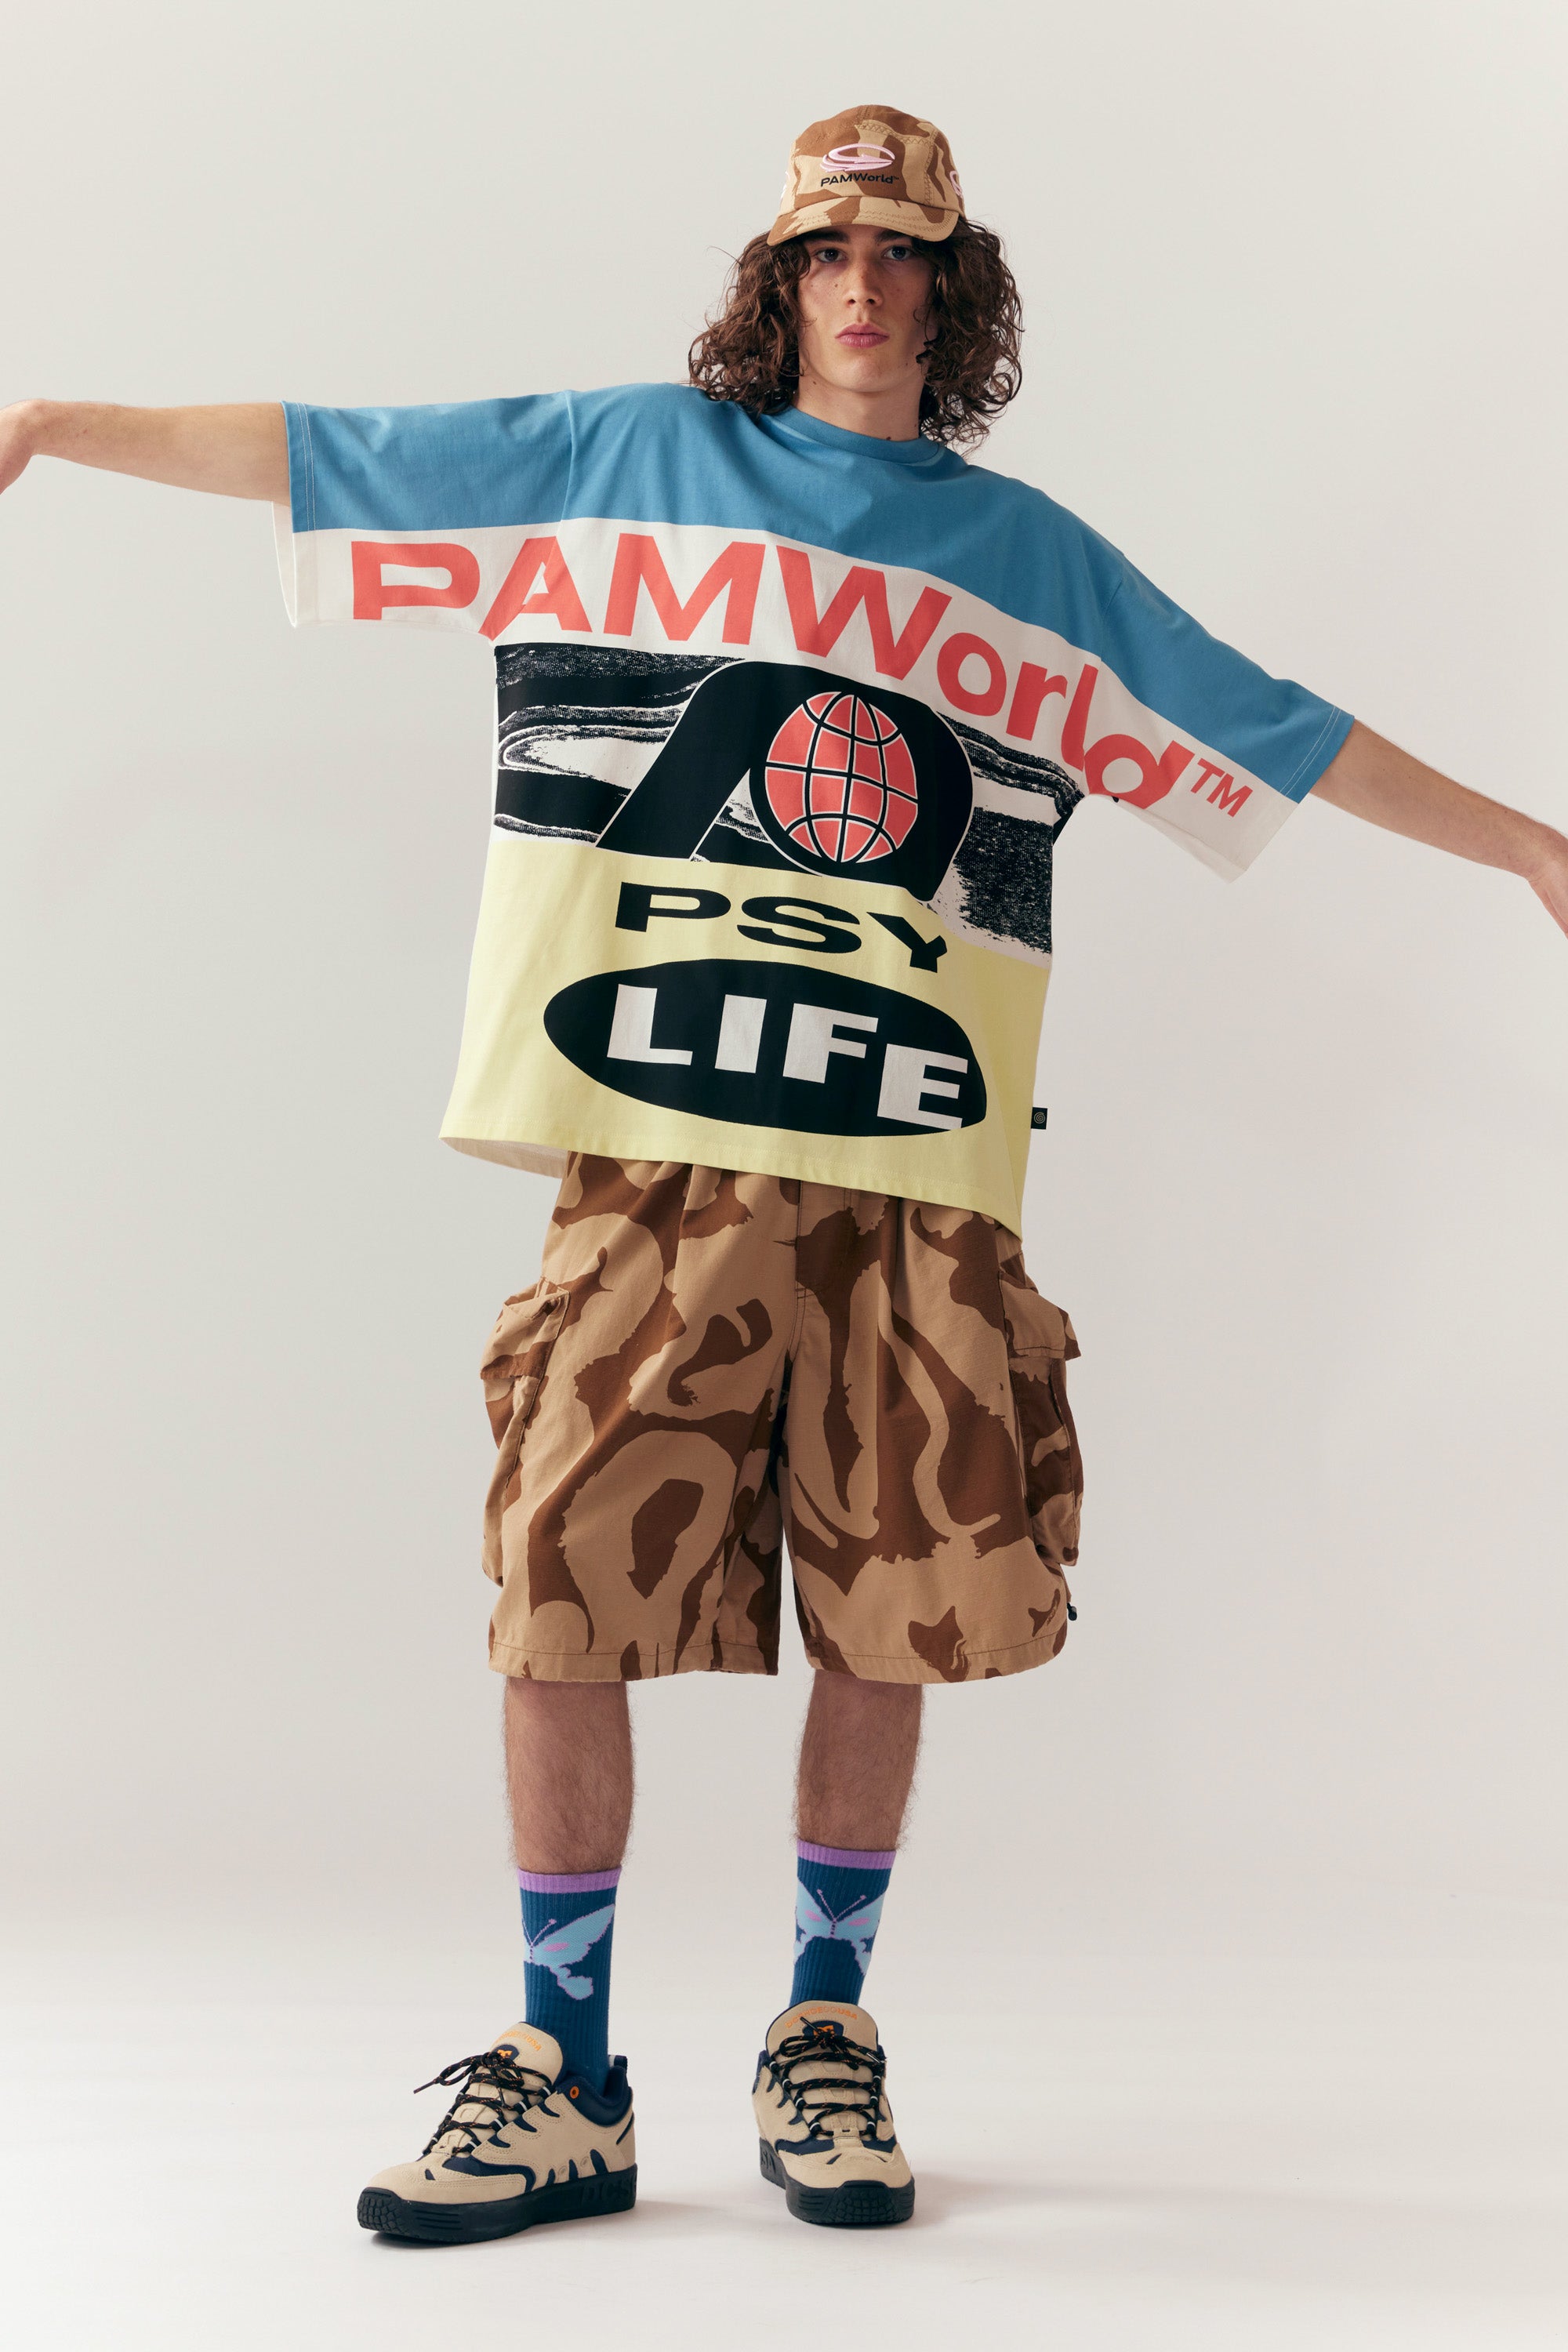 The PSY LYF FLAG OVERSIZED TEE  available online with global shipping, and in PAM Stores Melbourne and Sydney.